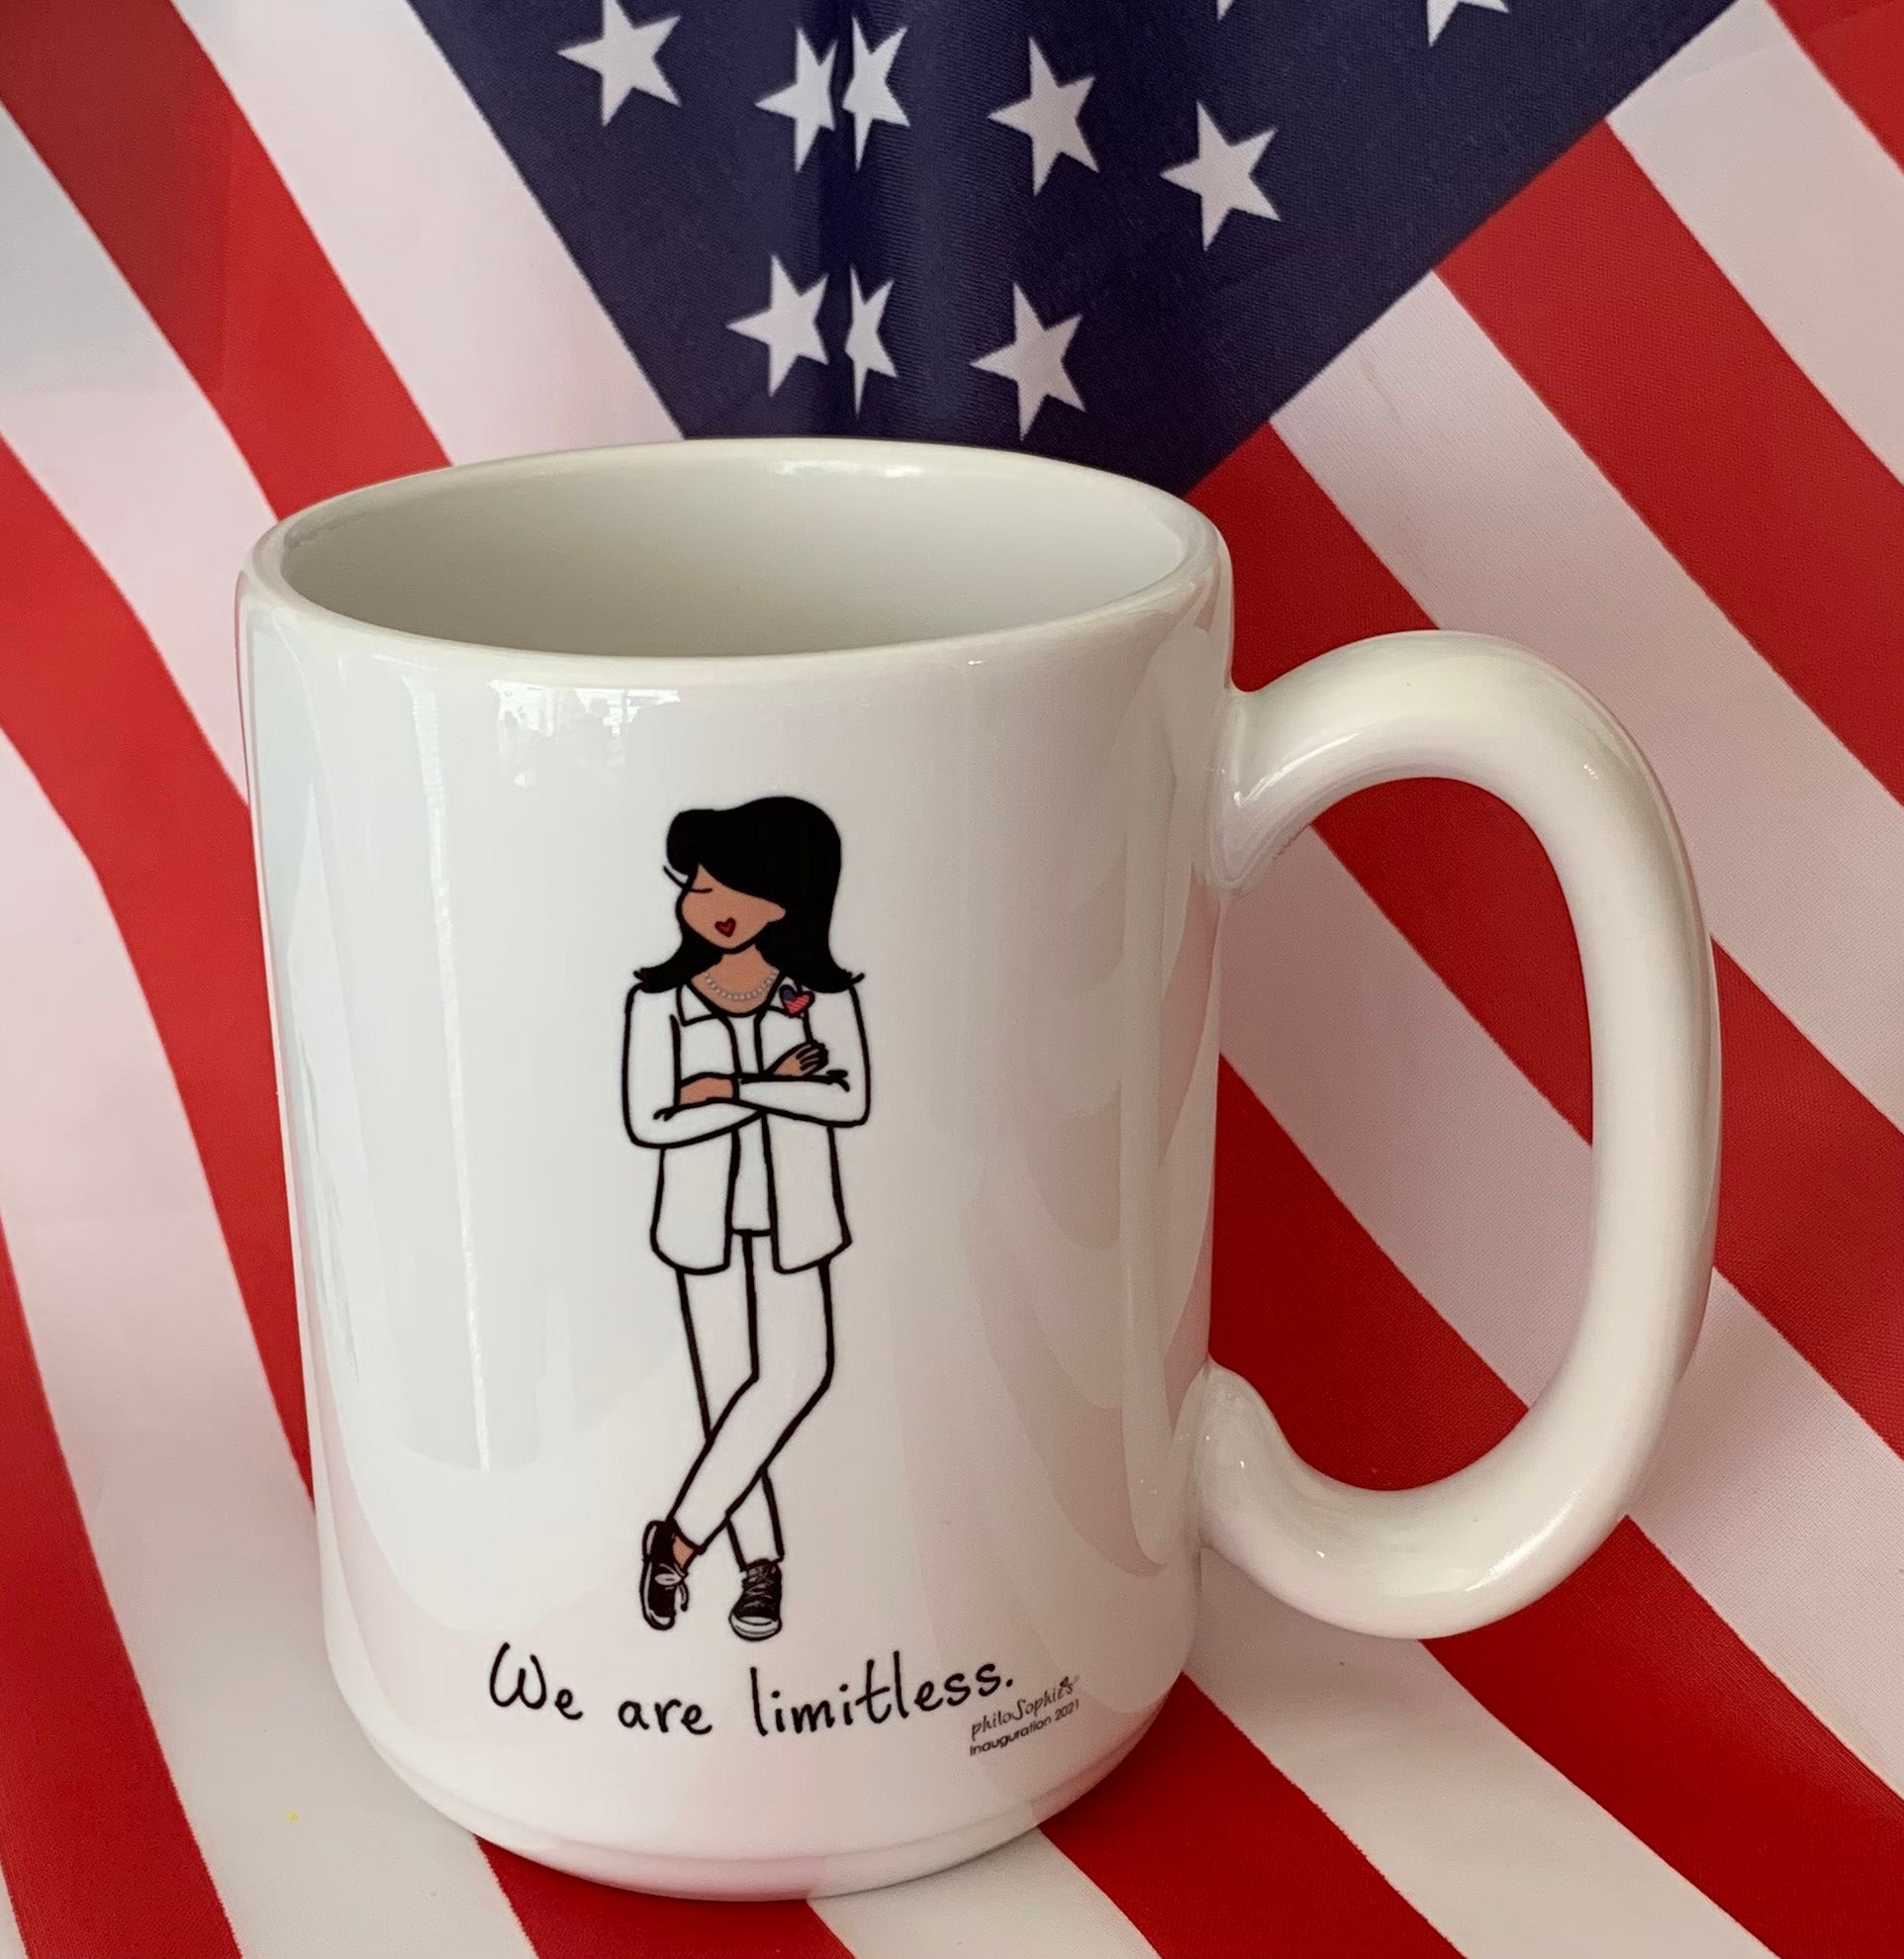 We are limitless - philoSophie's 15 Ounce Ceramic Mug, Made in the USA